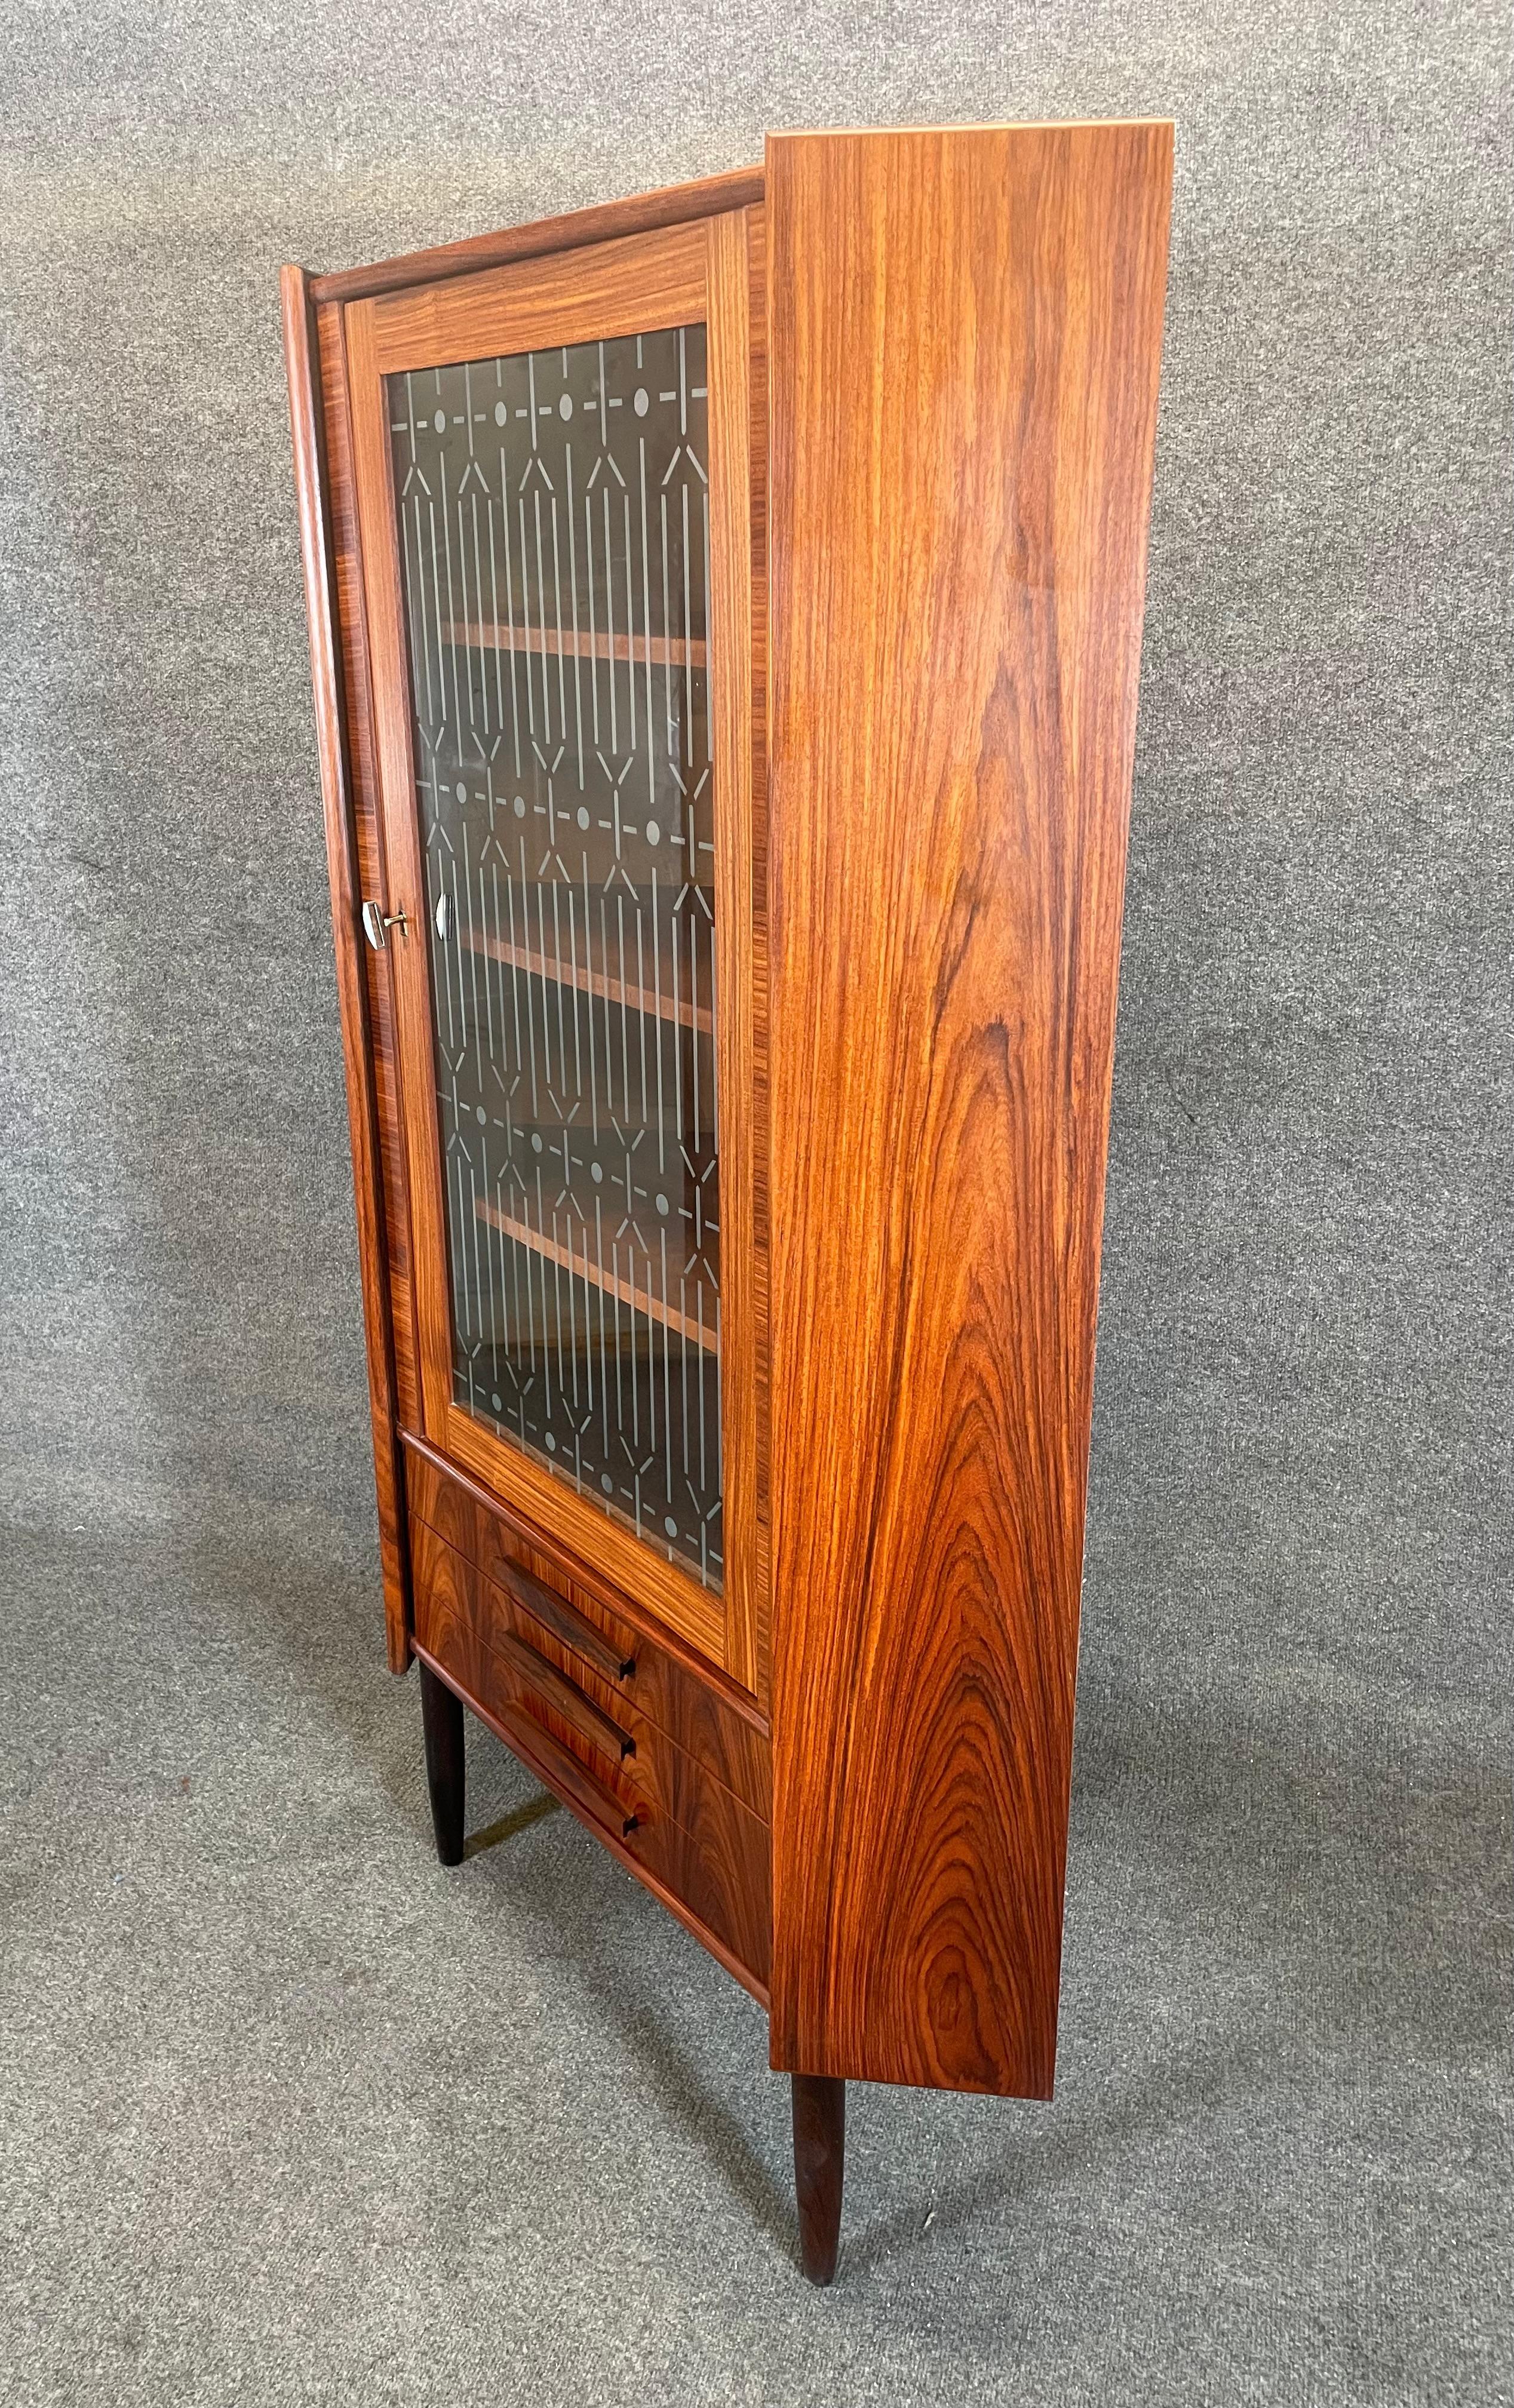 Woodwork Vintage Danish Mid Century Modern Rosewood Corner Cabinet With Etched Glass